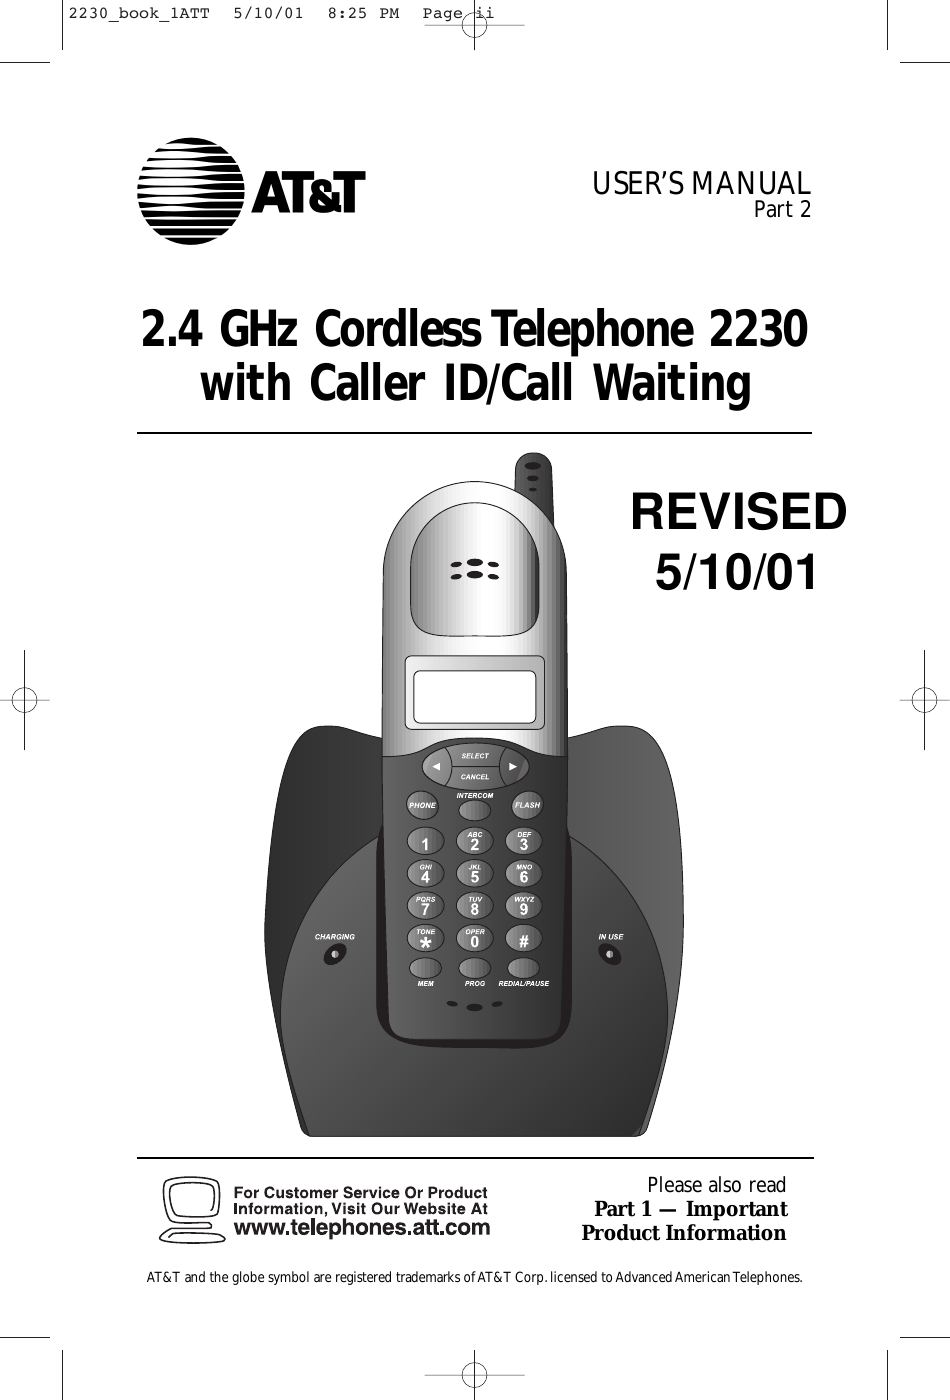 12.4 GHz Cordless Telephone 2230with Caller ID/Call Waiting1Please also readPart 1 — Important Product InformationUSER’S MANUAL Part 2AT&amp;T and the globe symbol are registered trademarks of AT&amp;T Corp.licensed to Advanced American Telephones.REVISED5/10/012230_book_1ATT  5/10/01  8:25 PM  Page ii